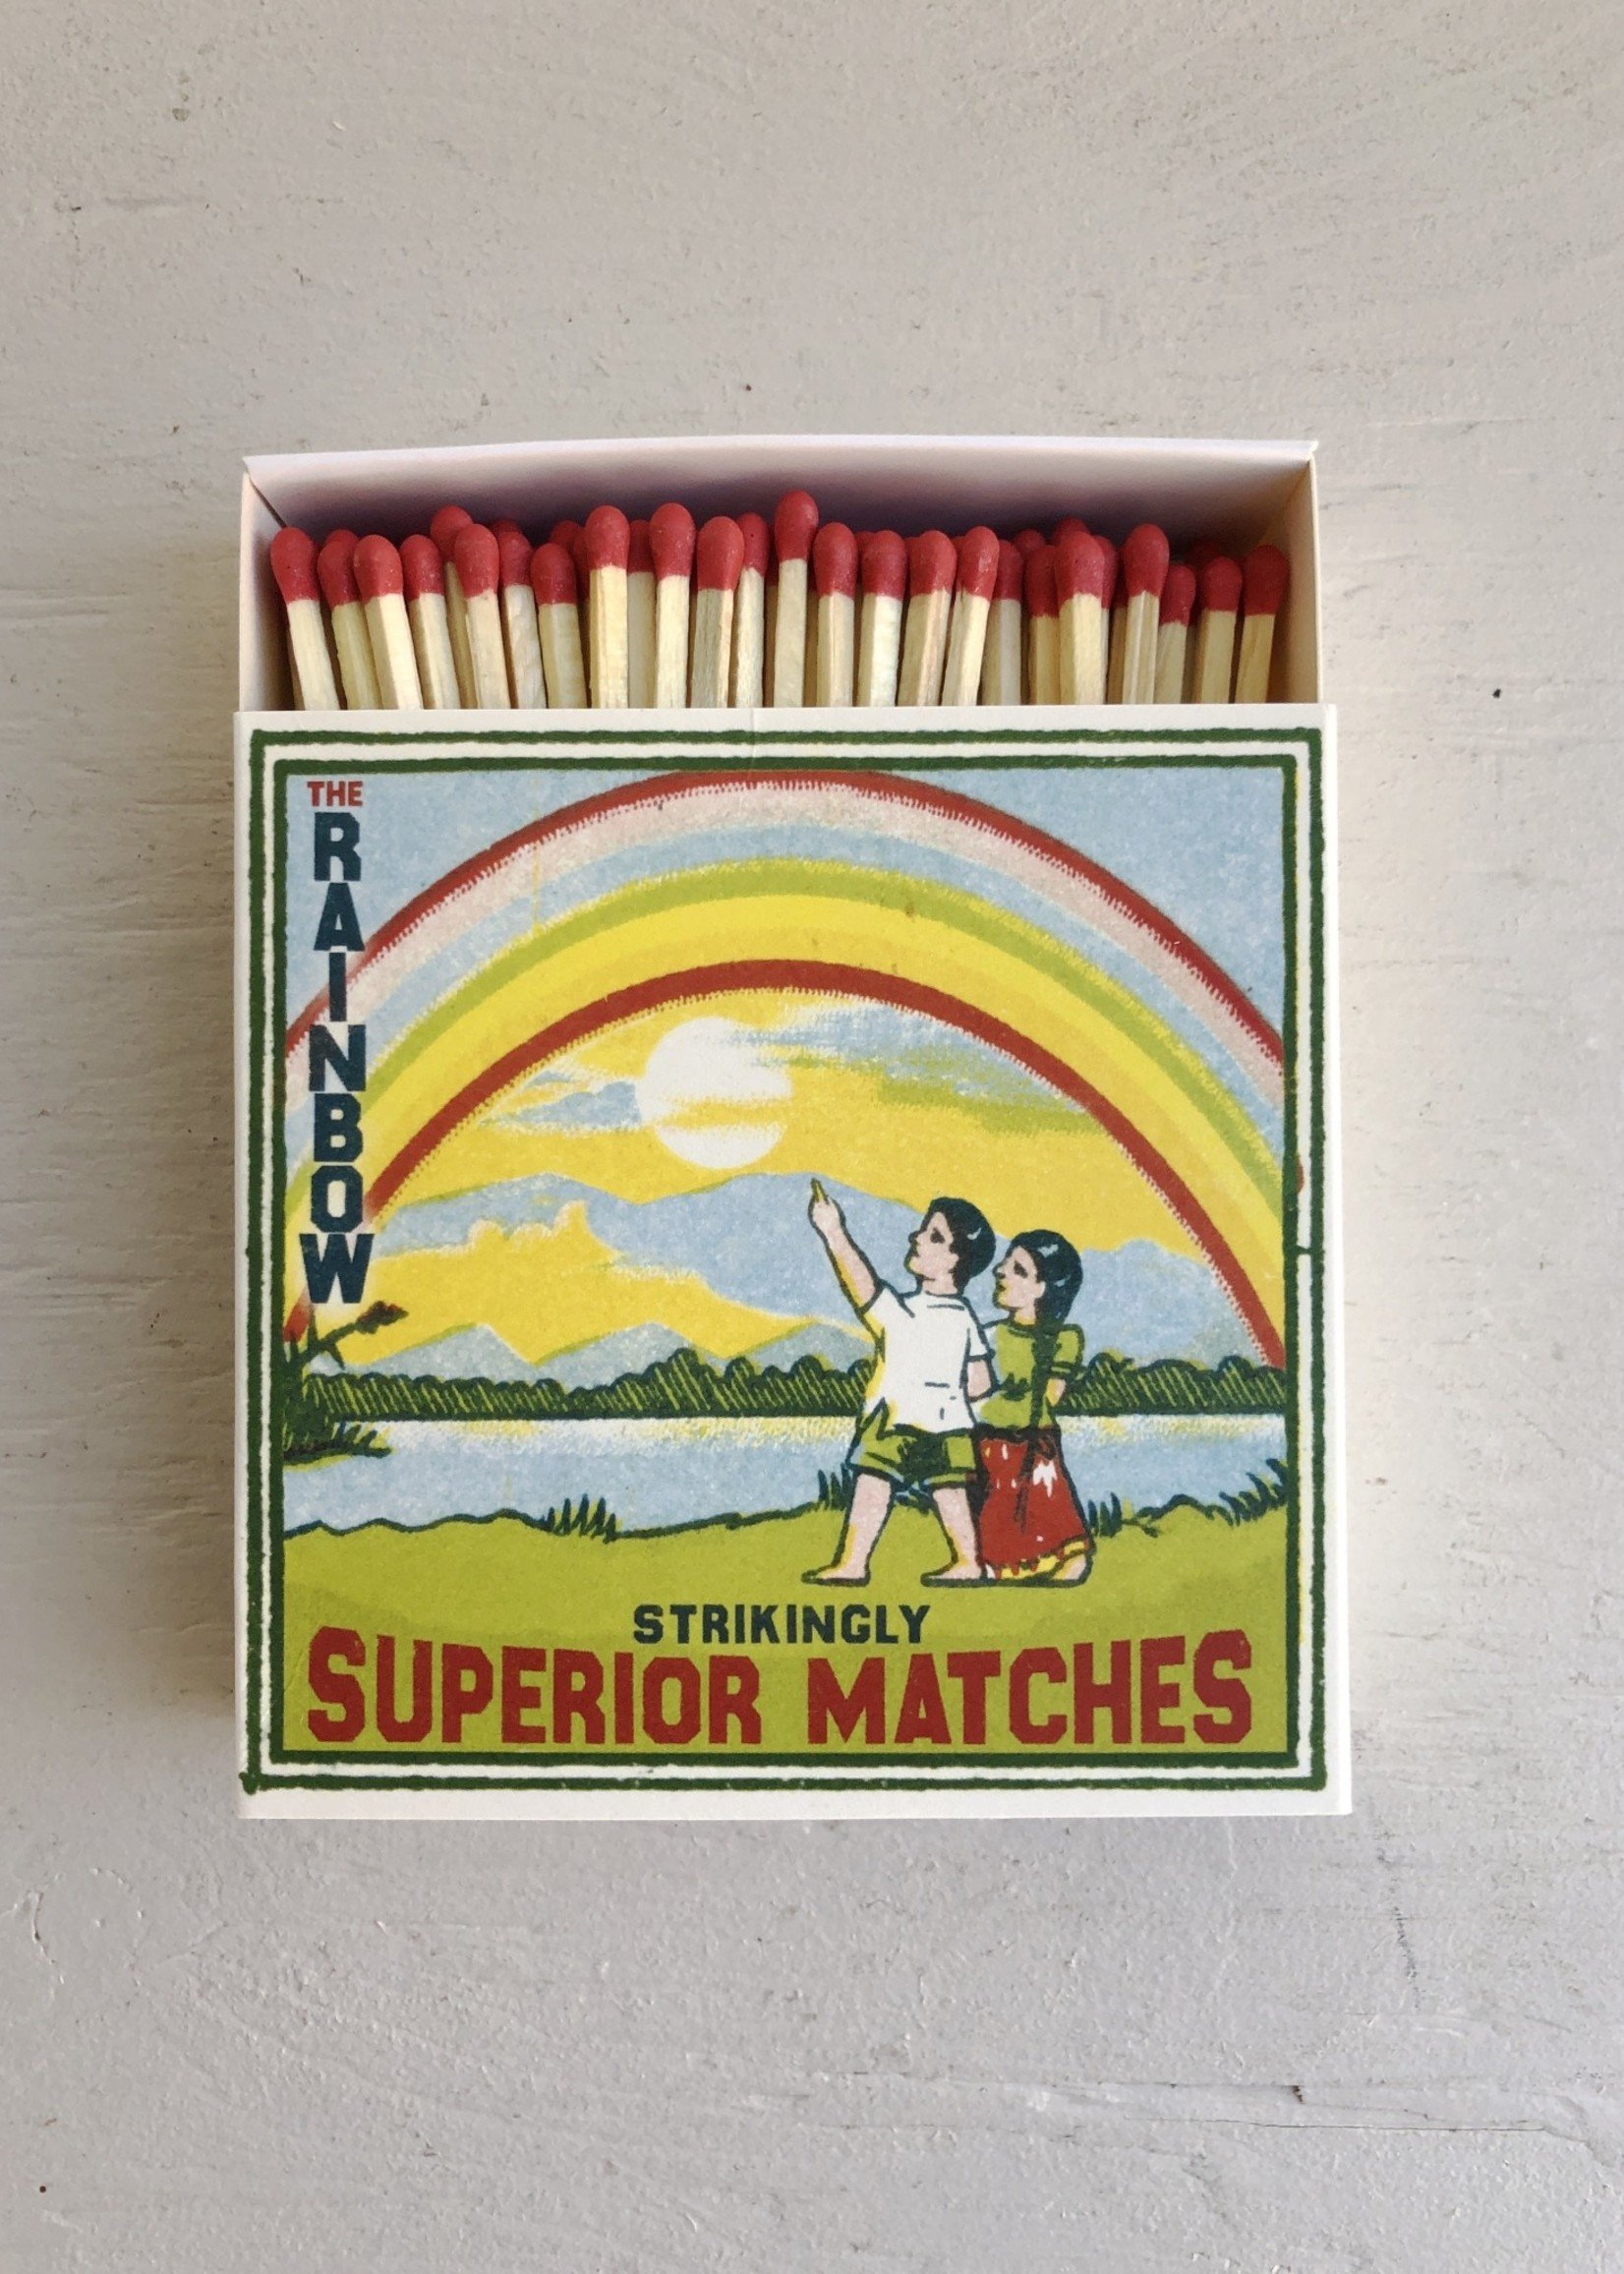 Archivist Box of Matches by Archivist